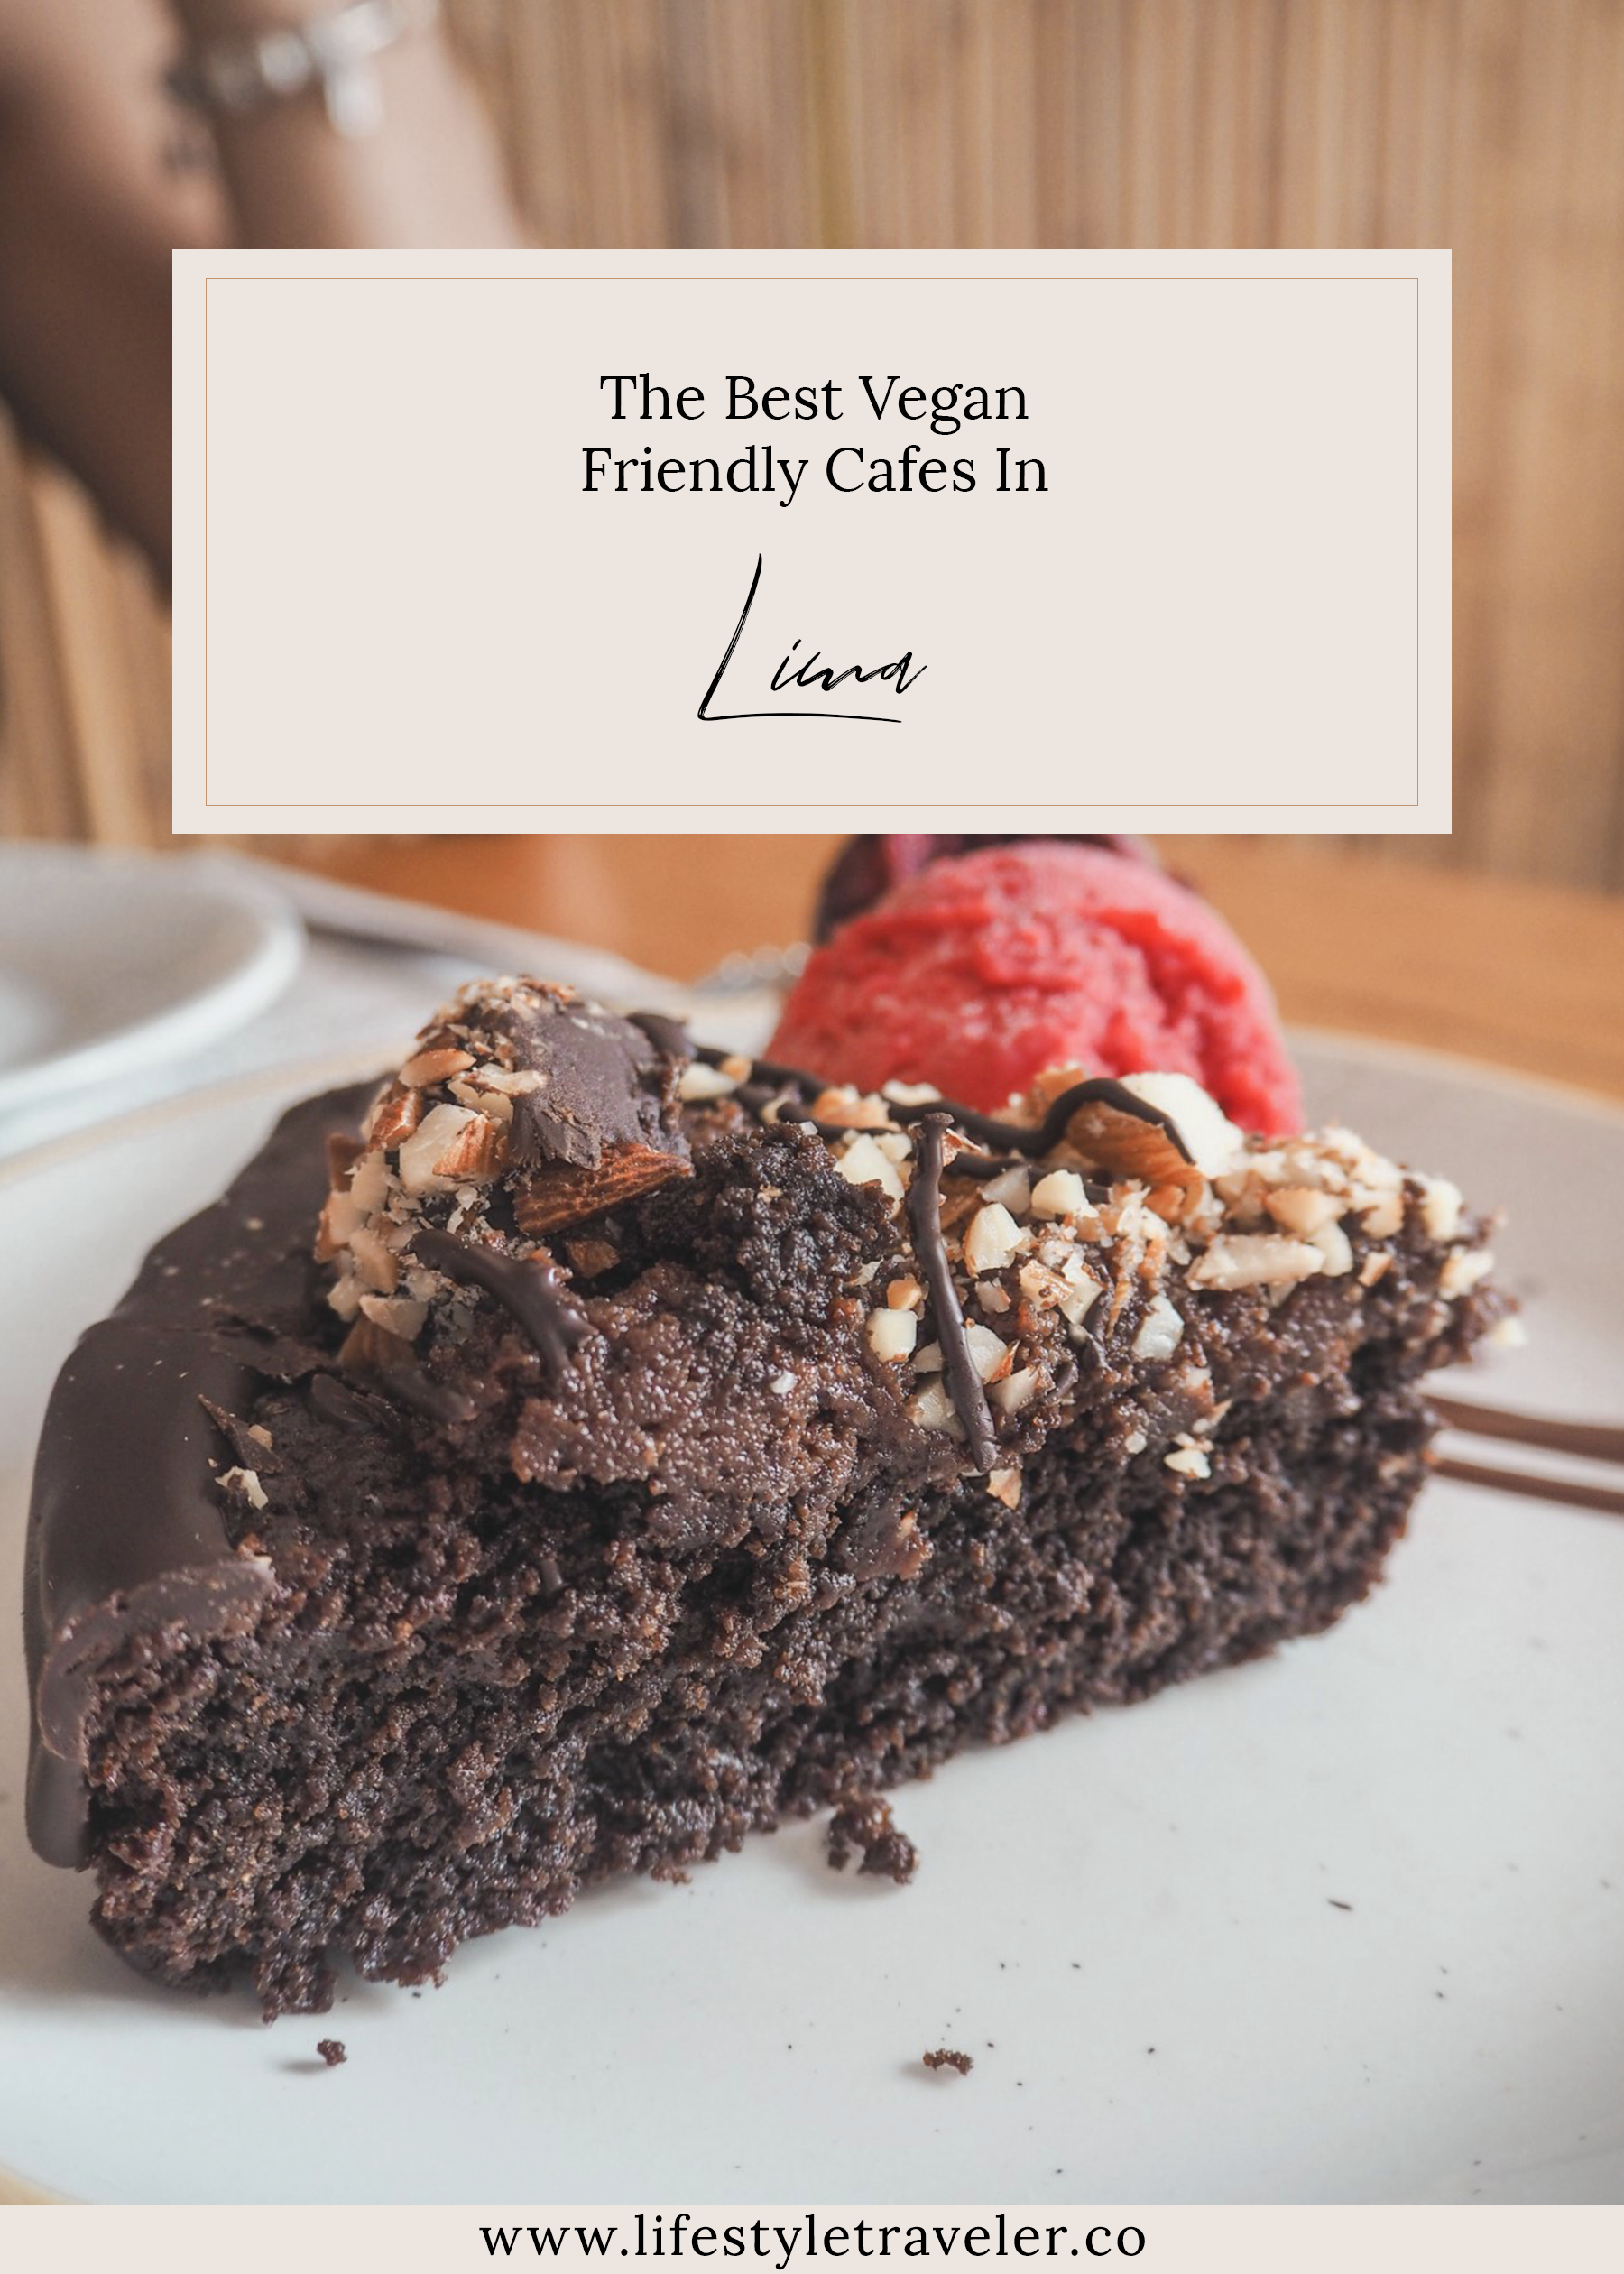 The Best Vegan Friendly Cafes In Lima | lifestyletraveler.co | IG: @lifestyletraveler.co